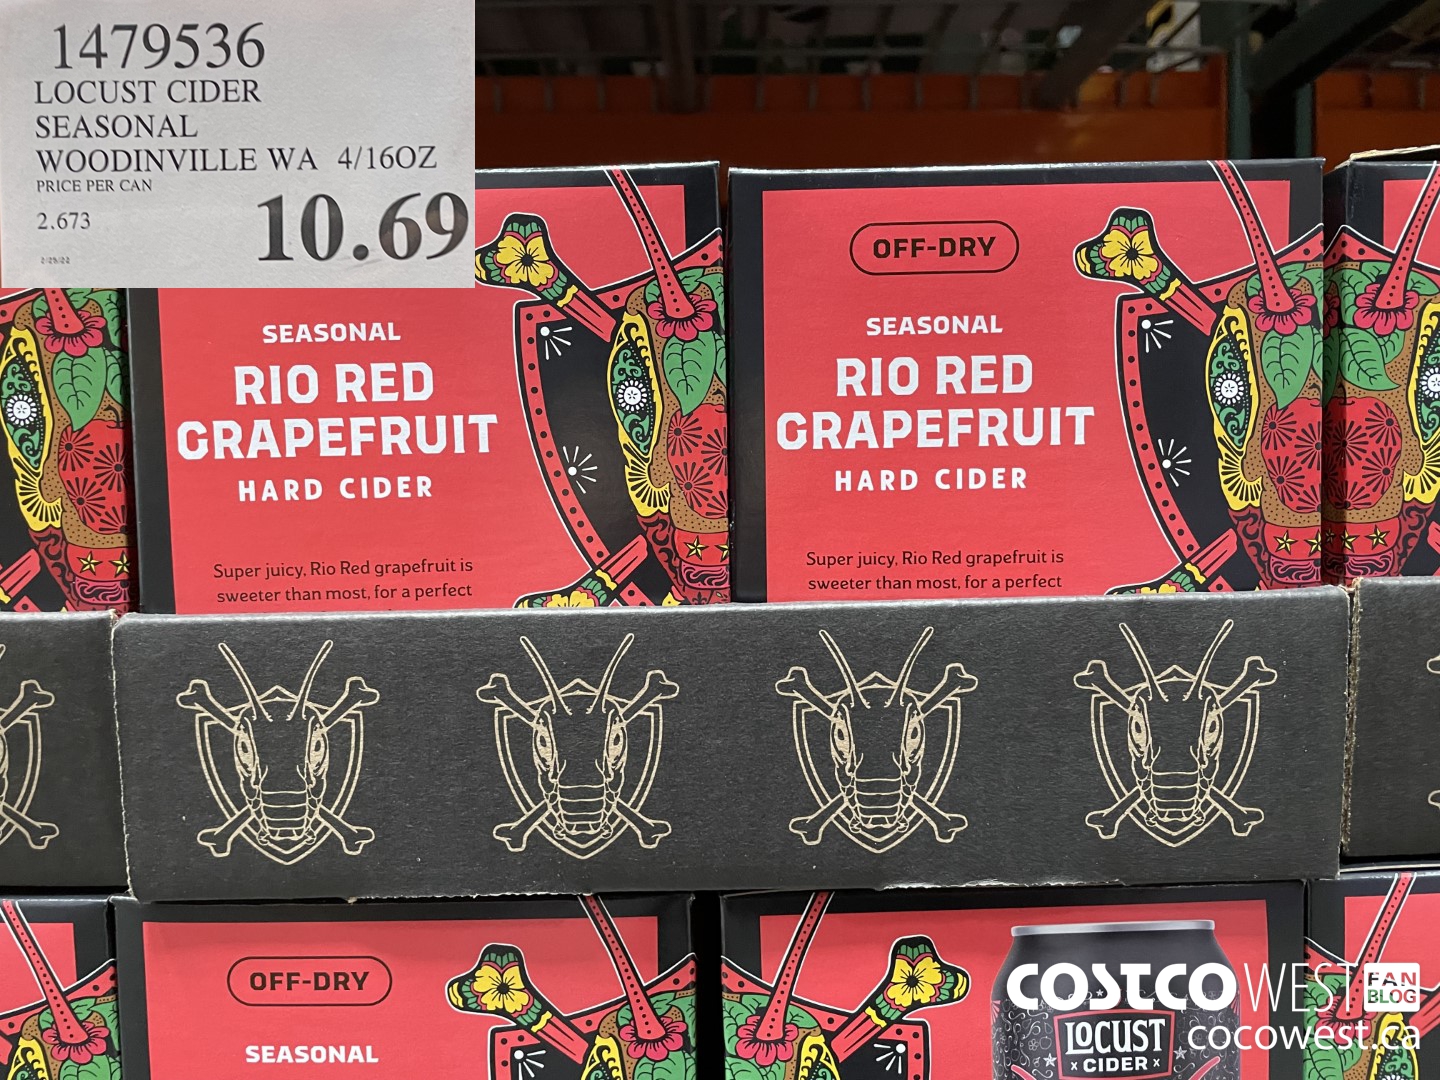 Polder Deluxe Instant read - Costco Does It Again